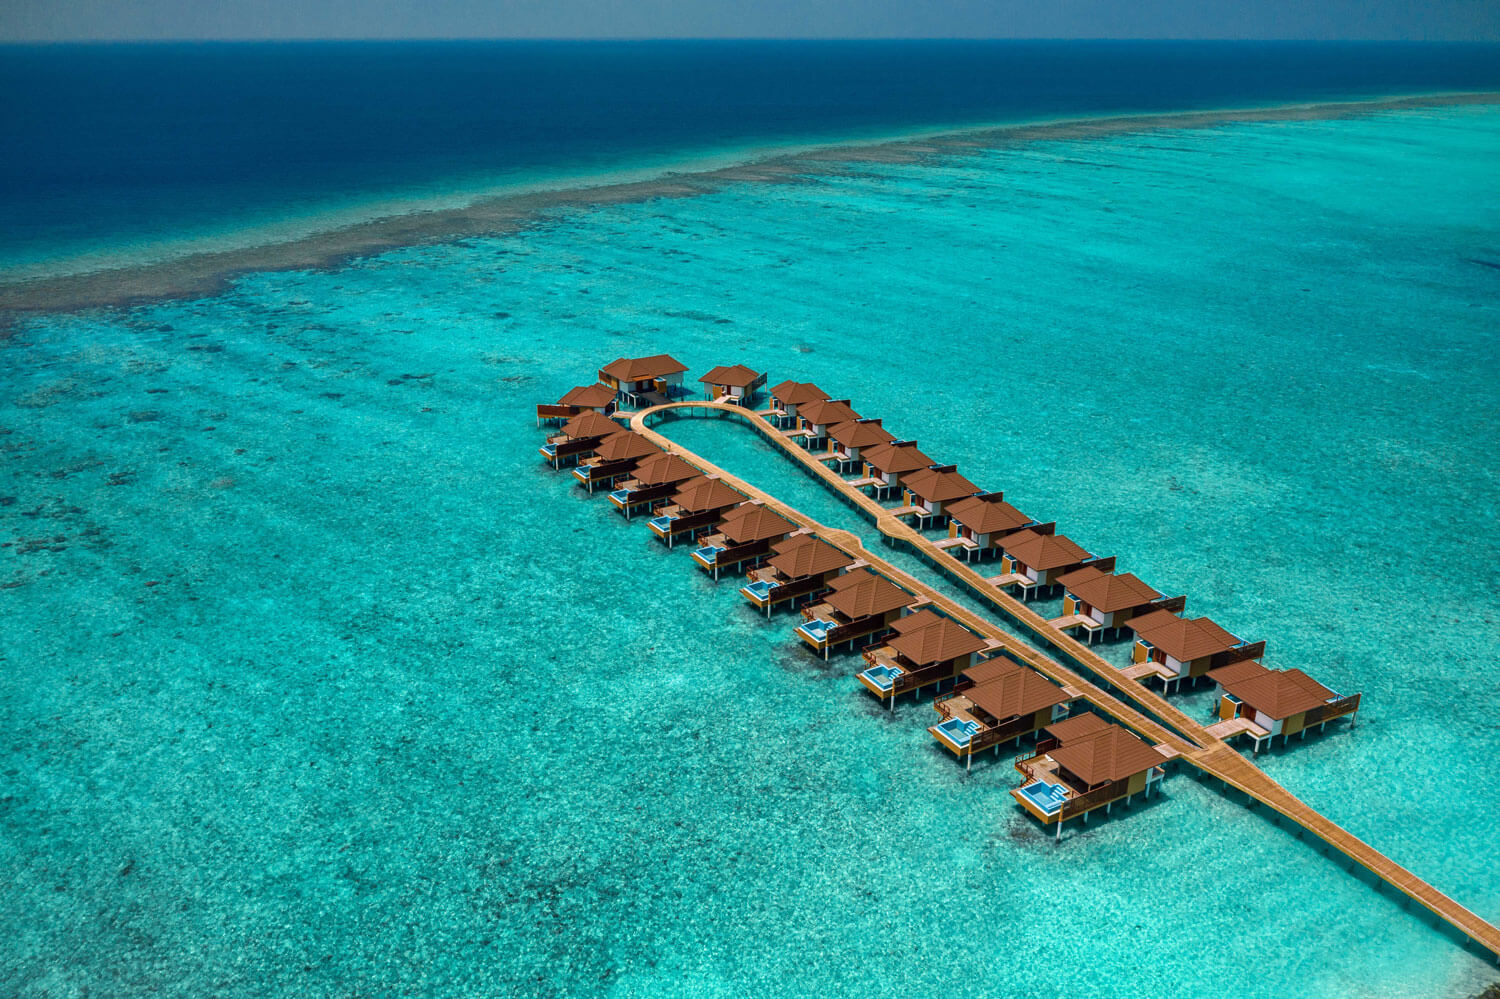 The Maldives hit its 1.5 million tourists target in style